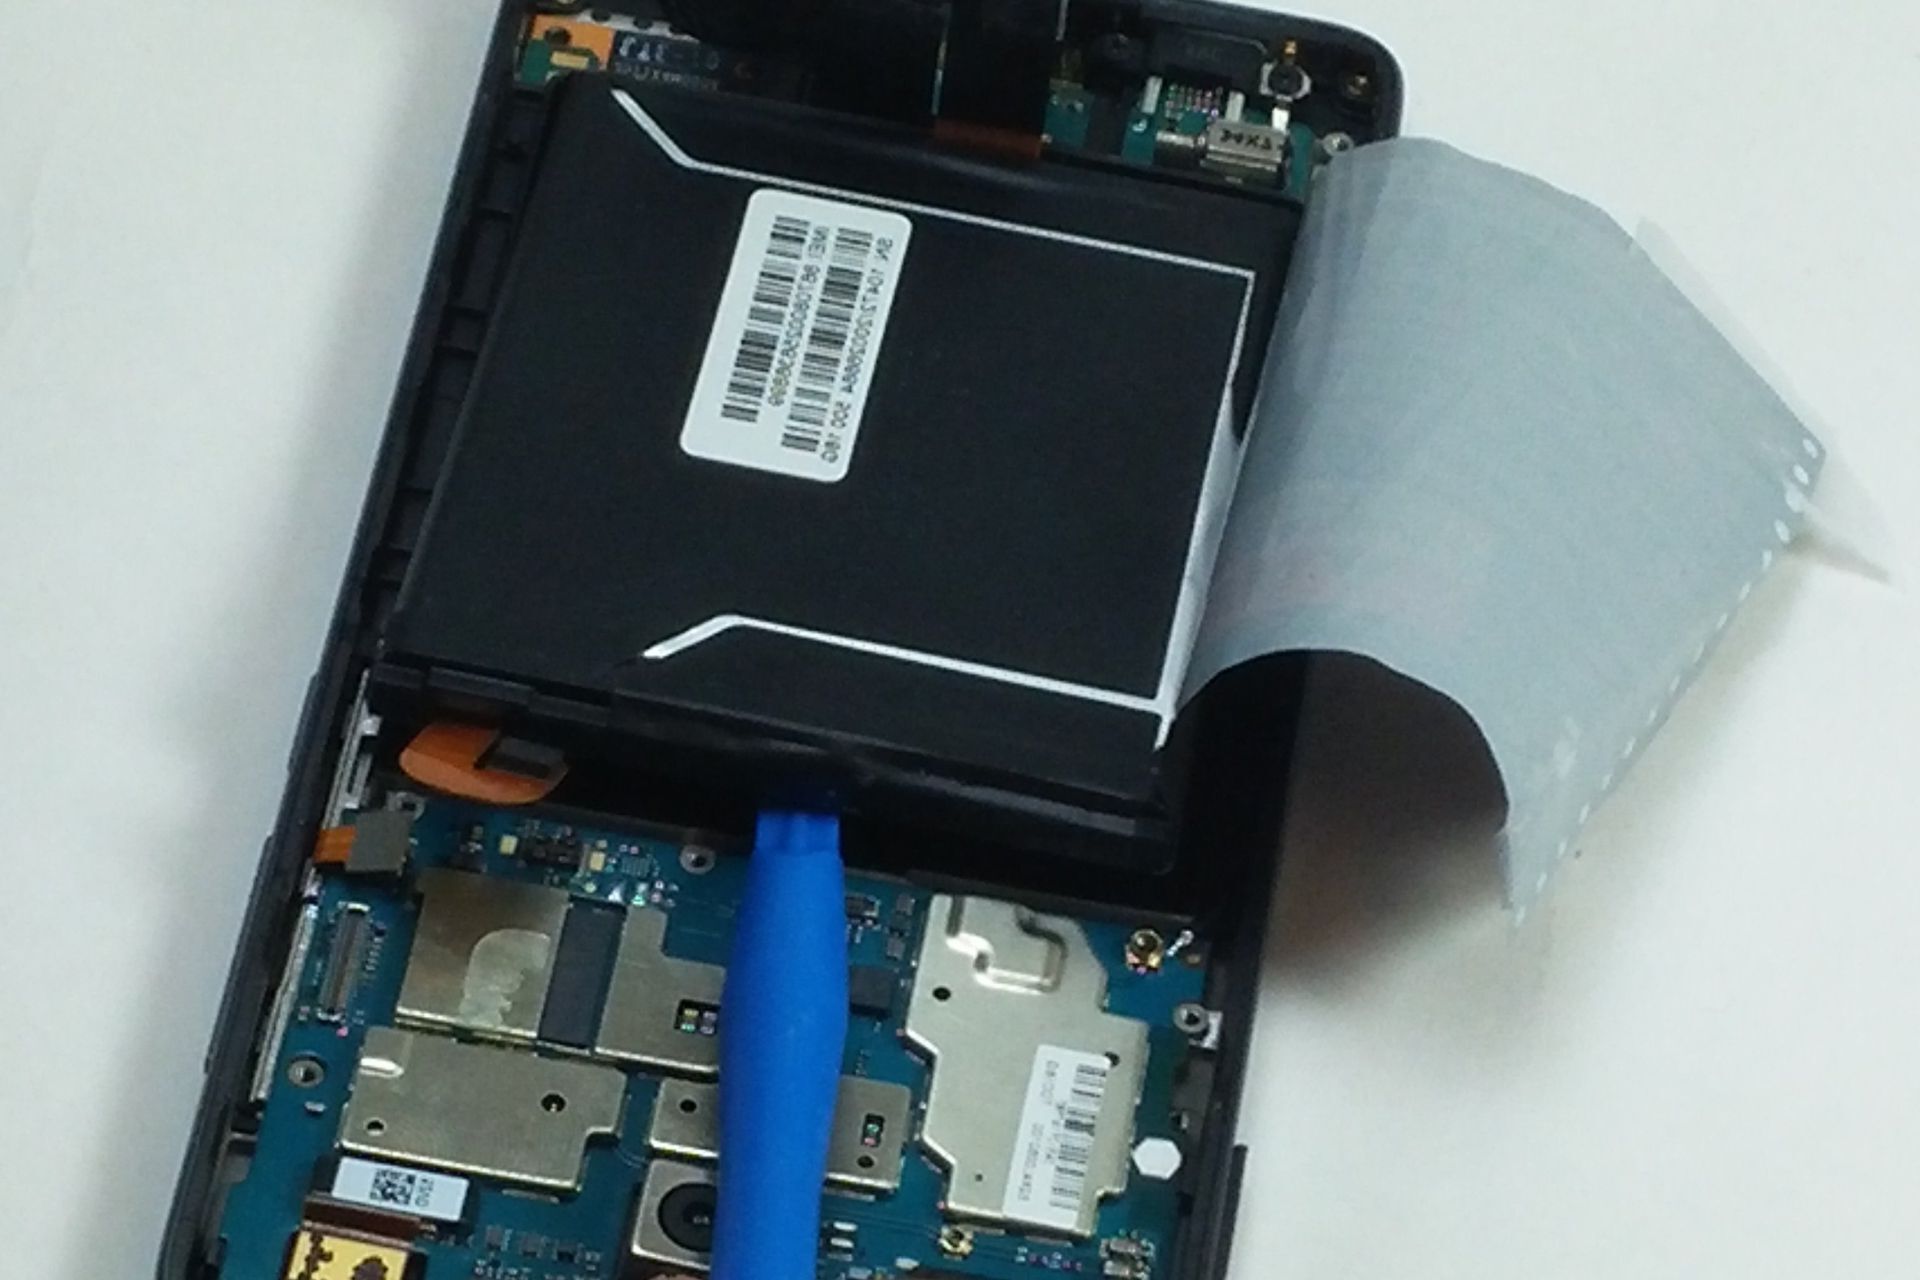 Battery Basics: Safely Extracting Battery From Xiaomi Redmi Note 4